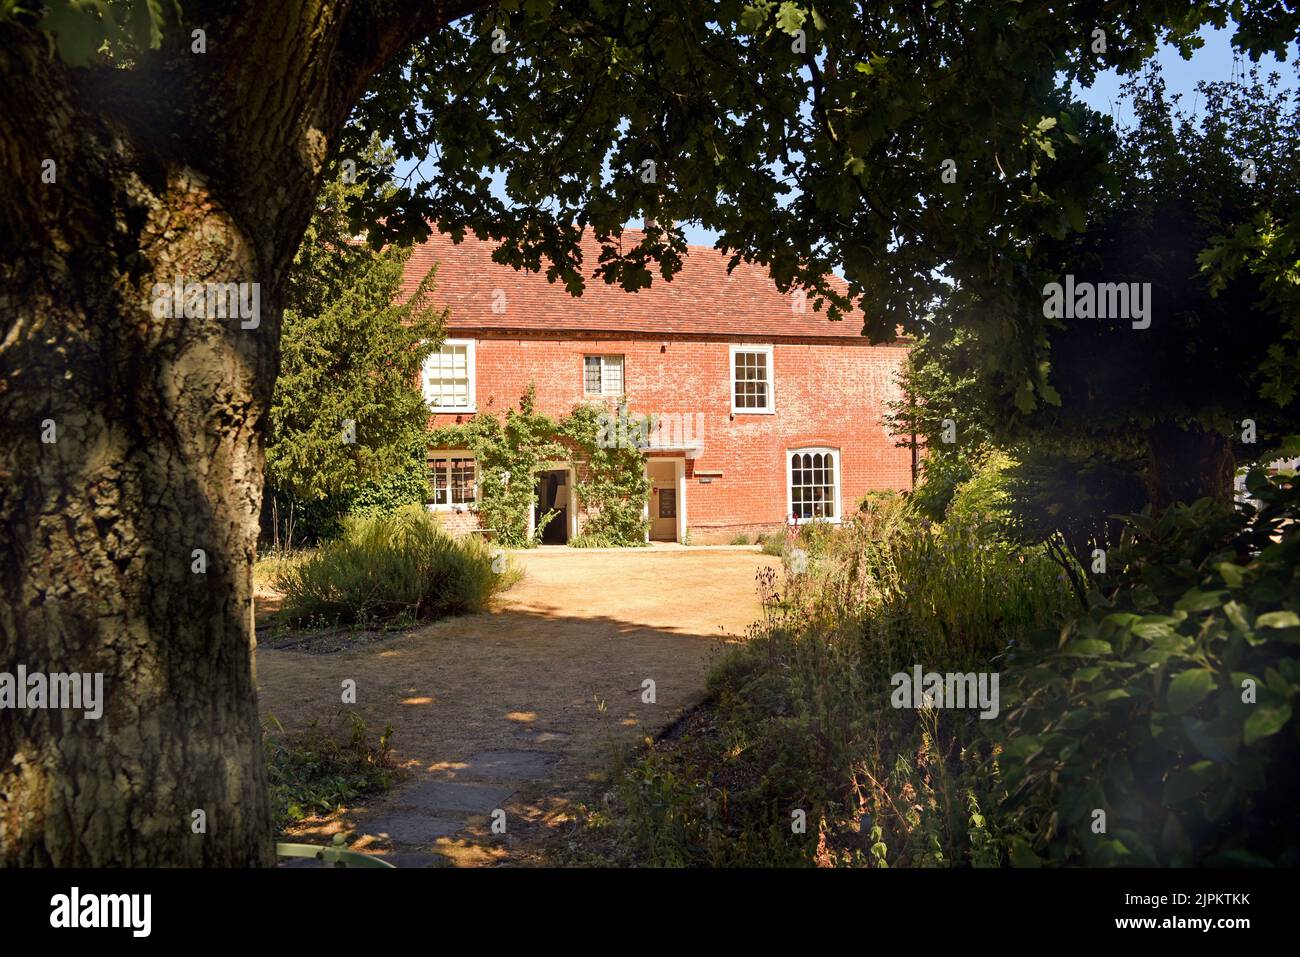 Jane Austen’s House, Chawton, near Alton, Hampshire, UK. This house is where Jane lived for the last 8 years of her life (1809-17). Stock Photo